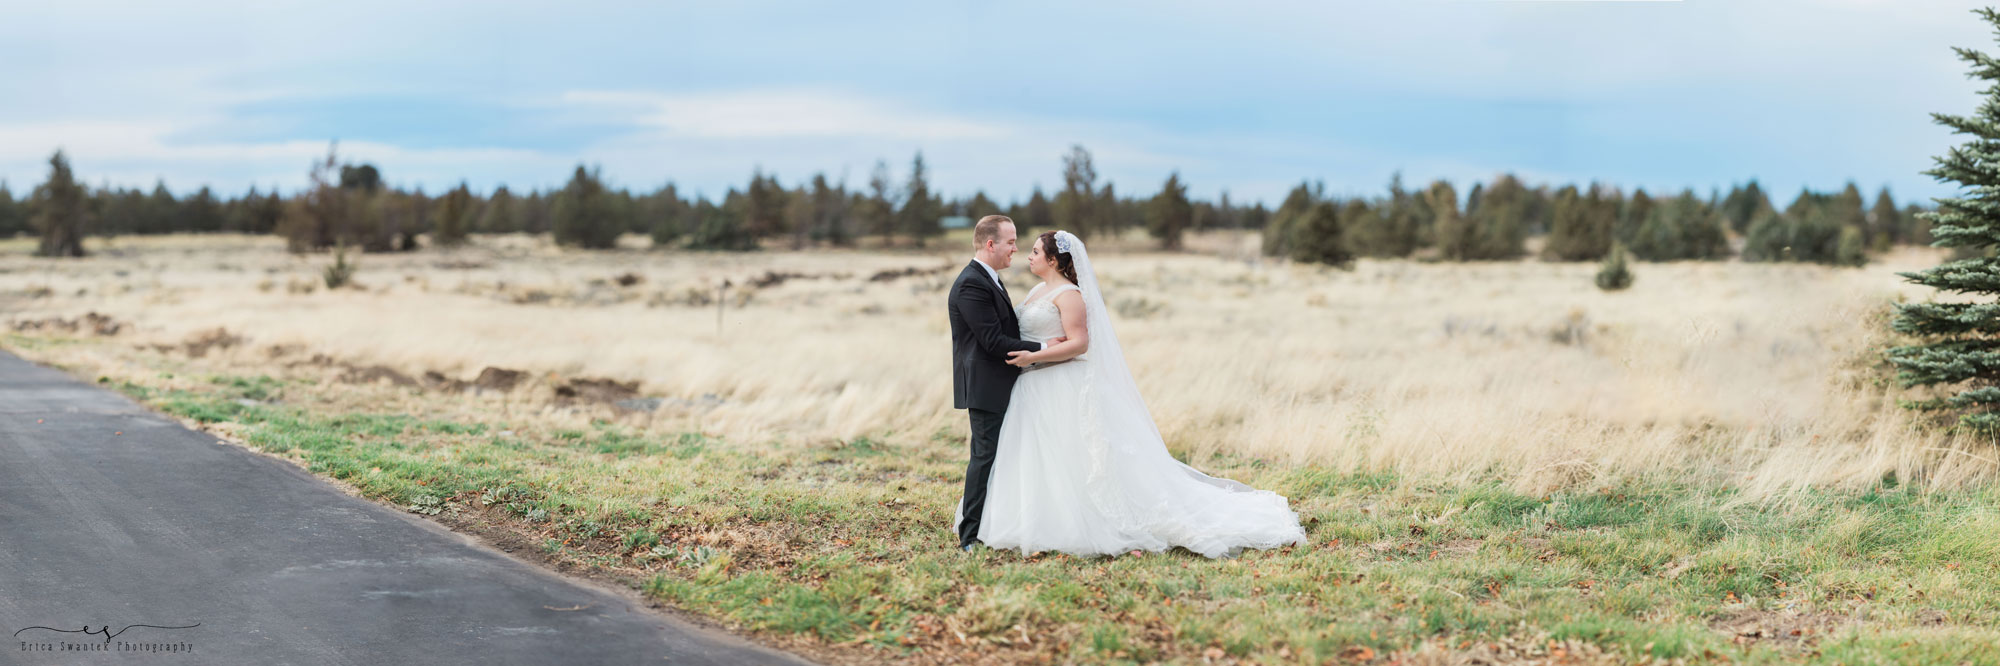 a couple stands in a field with the Cascade Mountains behind them at this Bend, Oregon winter wedding. | Erica Swantek Photography